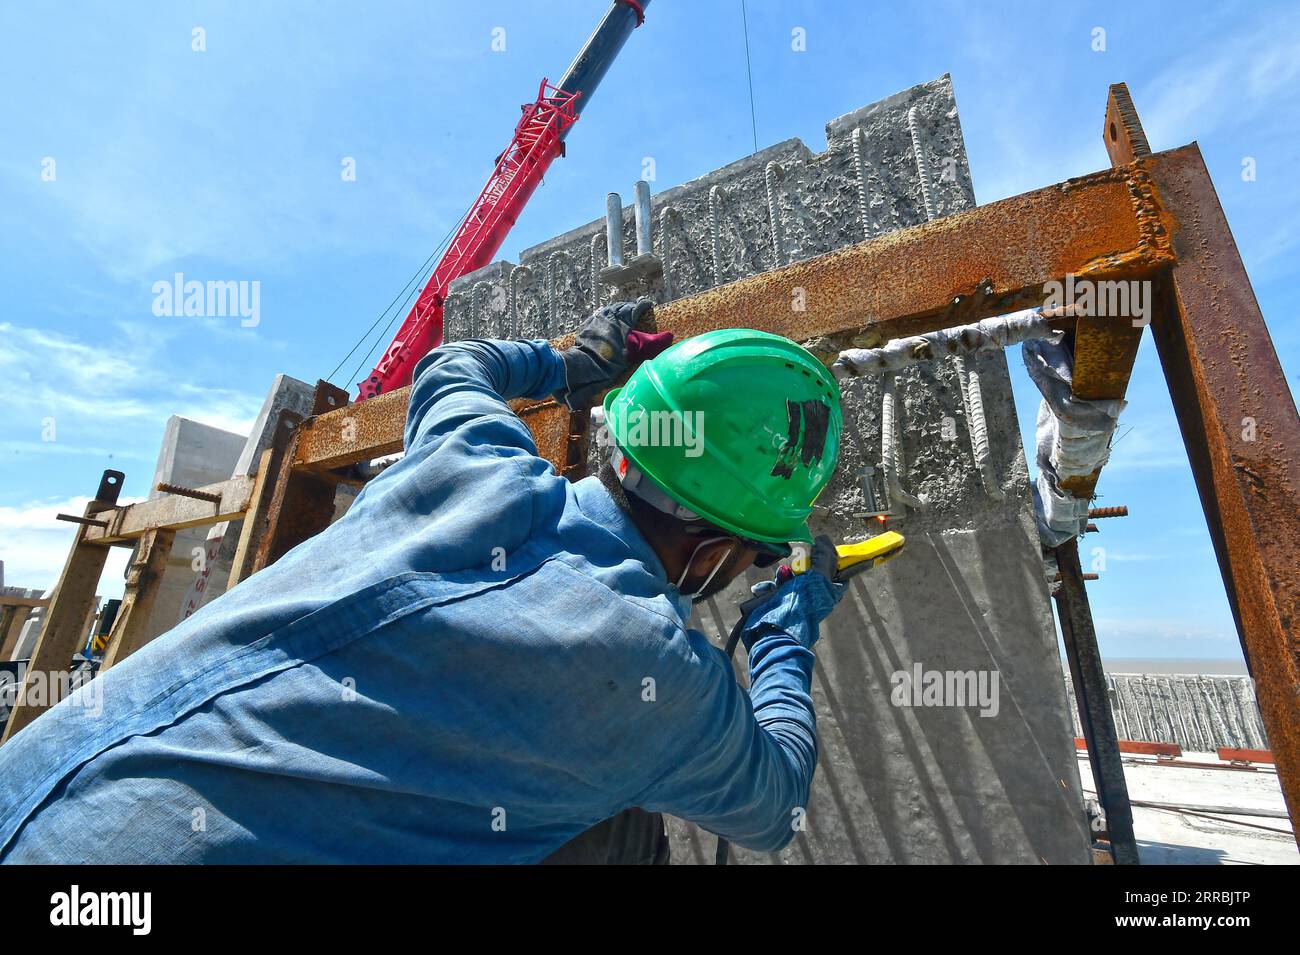 210926 -- MUNSHIGANJ, Sept. 26, 2021 -- A worker works at a construction site of Padma Multipurpose Bridge Project in Munshiganj on the outskirts of Dhaka, Bangladesh, on Sept. 12, 2021. For Bangladeshis, a dream is coming true. The history of crossing the mighty Padma river between dozens of districts in southern Bangladesh and the capital of Dhaka only by ferries or boats is all set to end. The mega multipurpose road-rail bridge dubbed the Dream Padma Bridge of Bangladesh is nearing completion after workers overcame tons of hurdles, including challenges brought by the COVID-19 pandemic. The Stock Photo